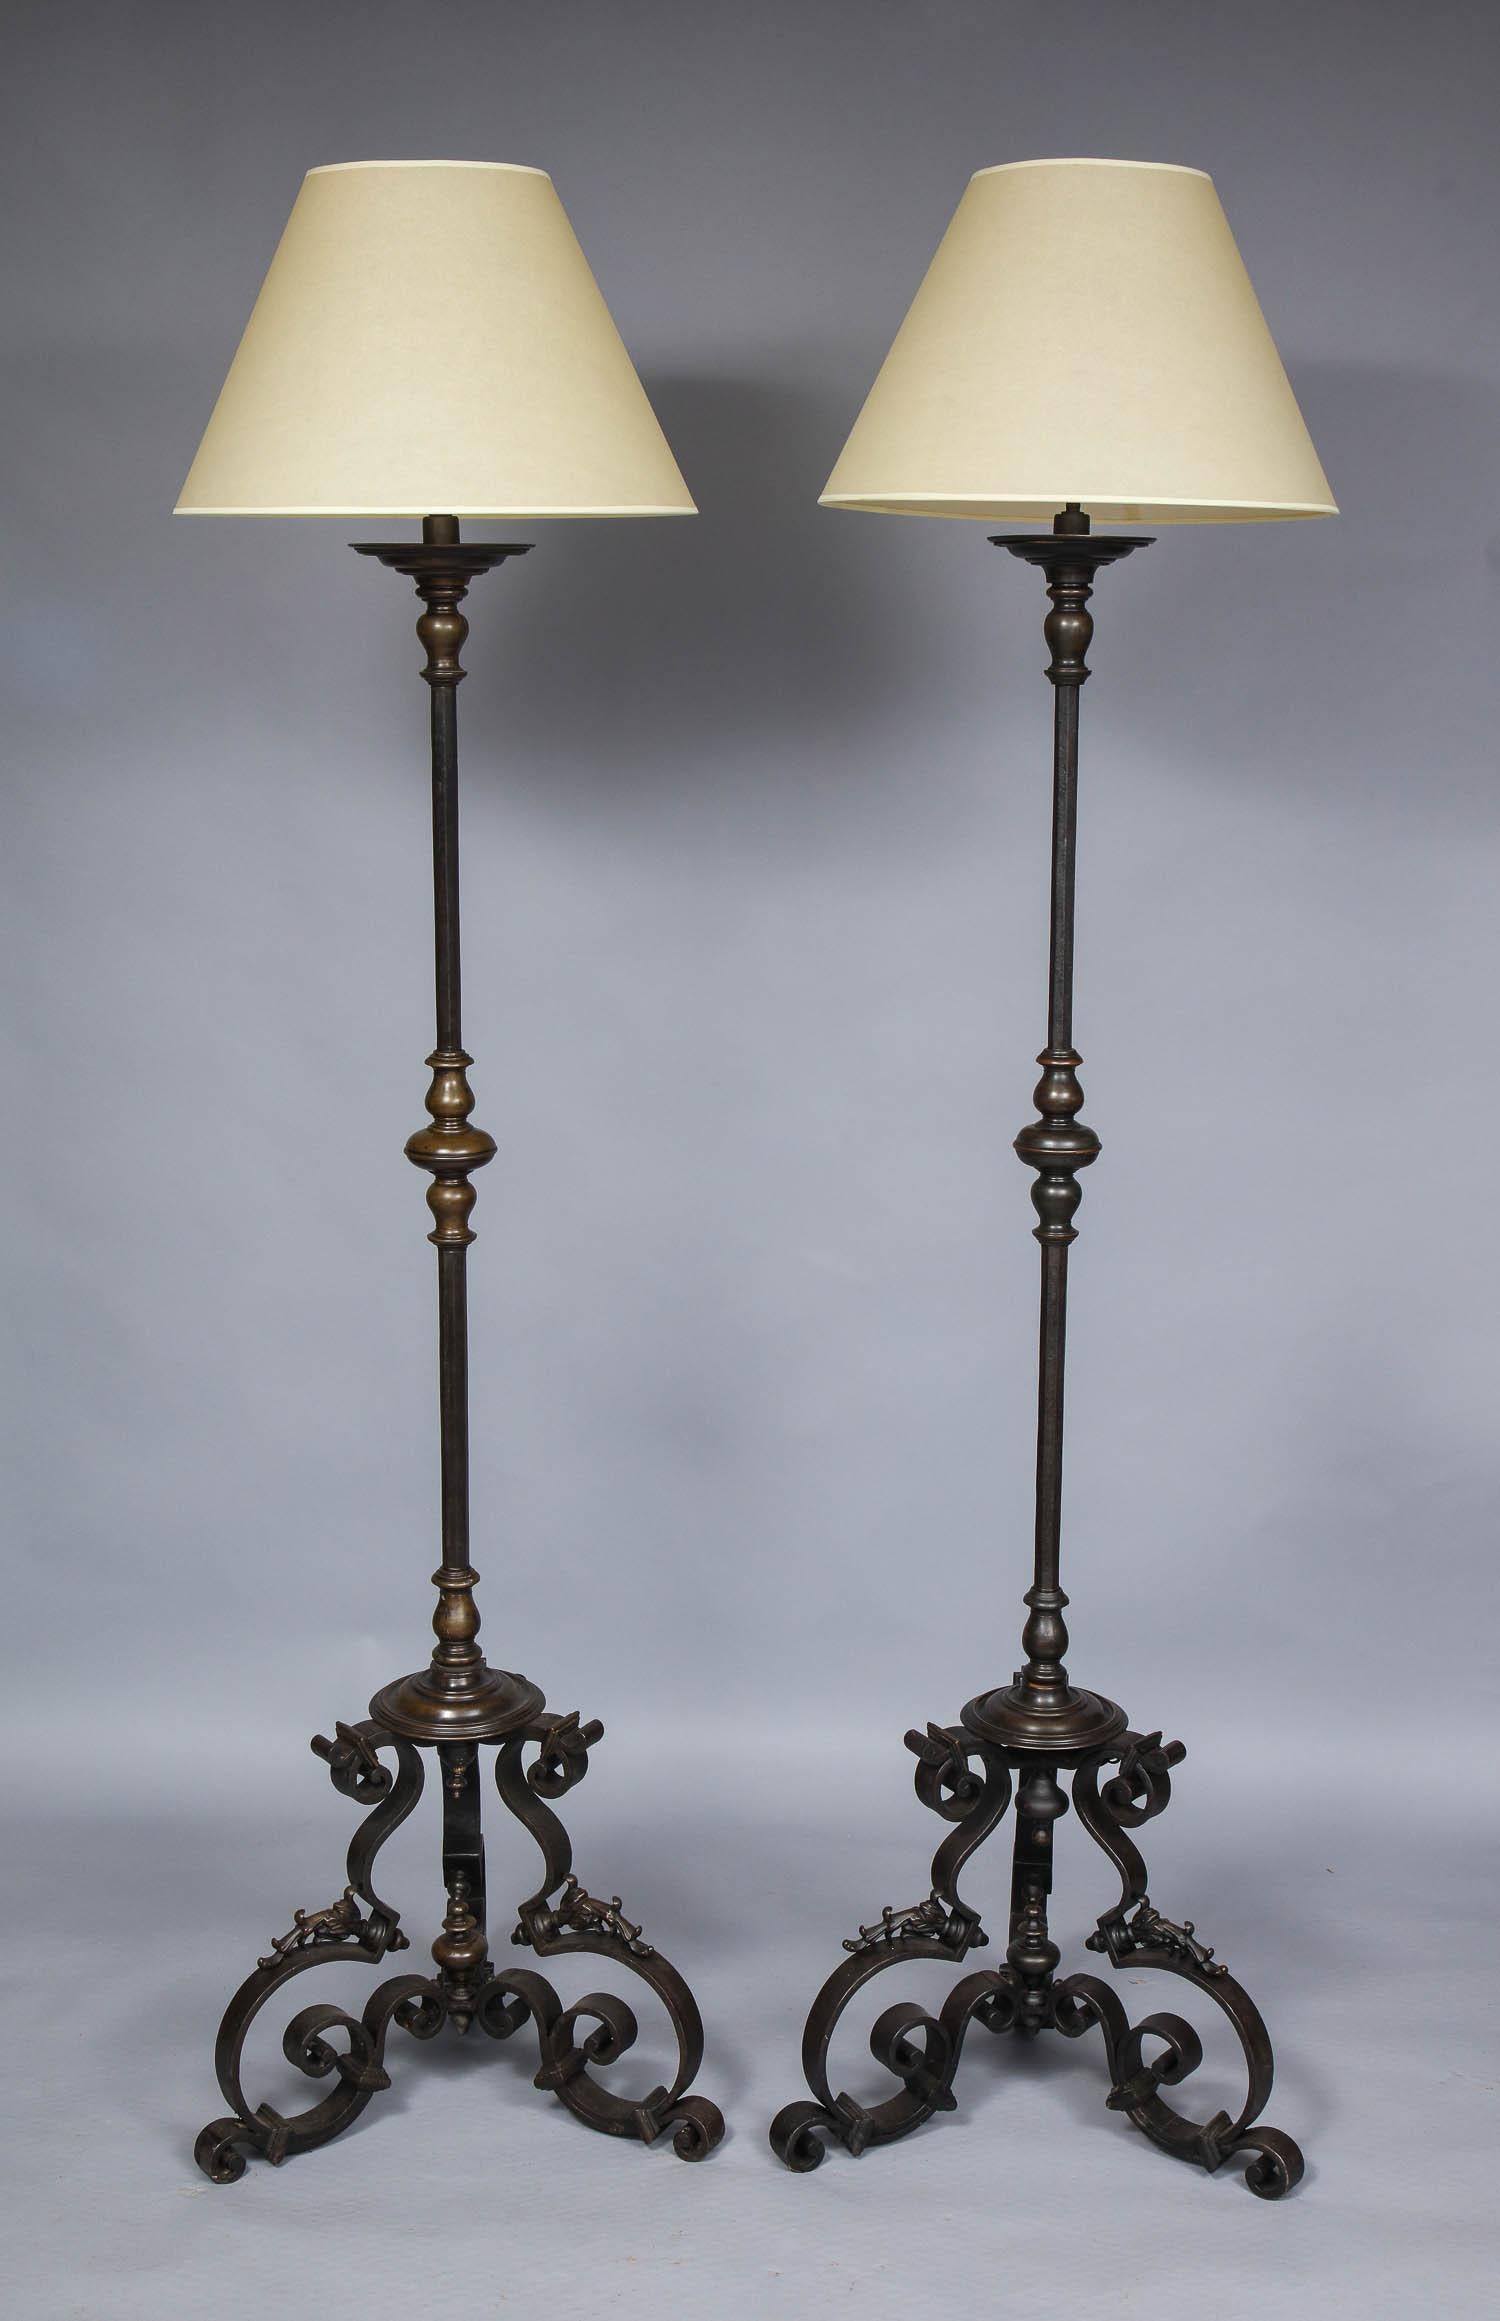 Very fine quality pair of bronze and wrought iron torchere floor lamps having richly patinated bronze bobeches, collars and bands, the octagonal iron shafts in hand hammered iron, standing on scrolled iron bases with additional bronze decorations